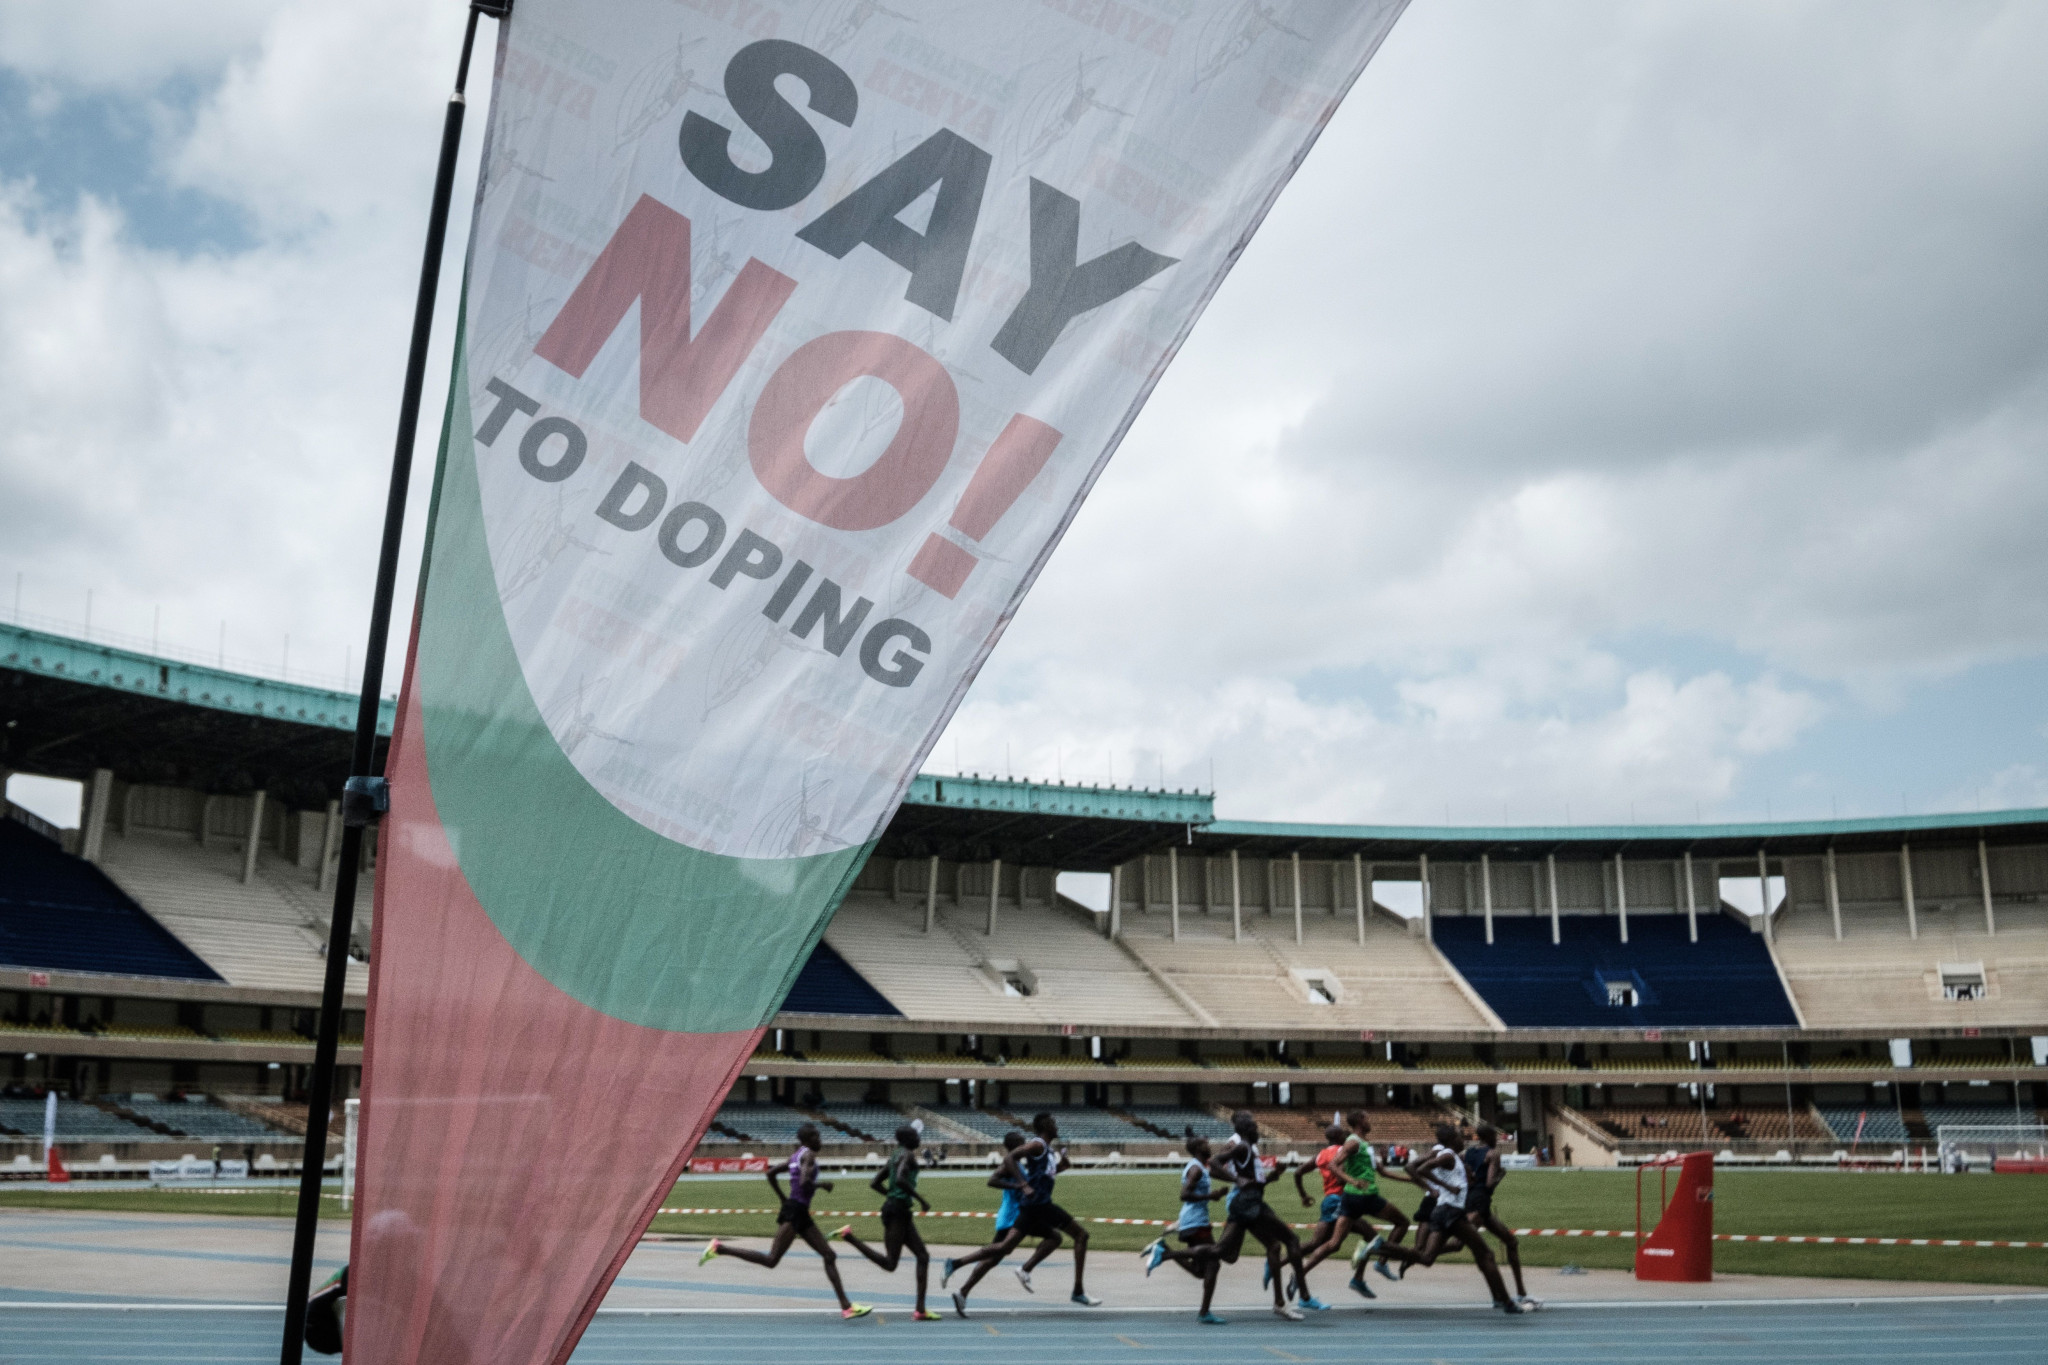 Kenyan athletes Korir and Saina banned after testing positive for norandrosterone